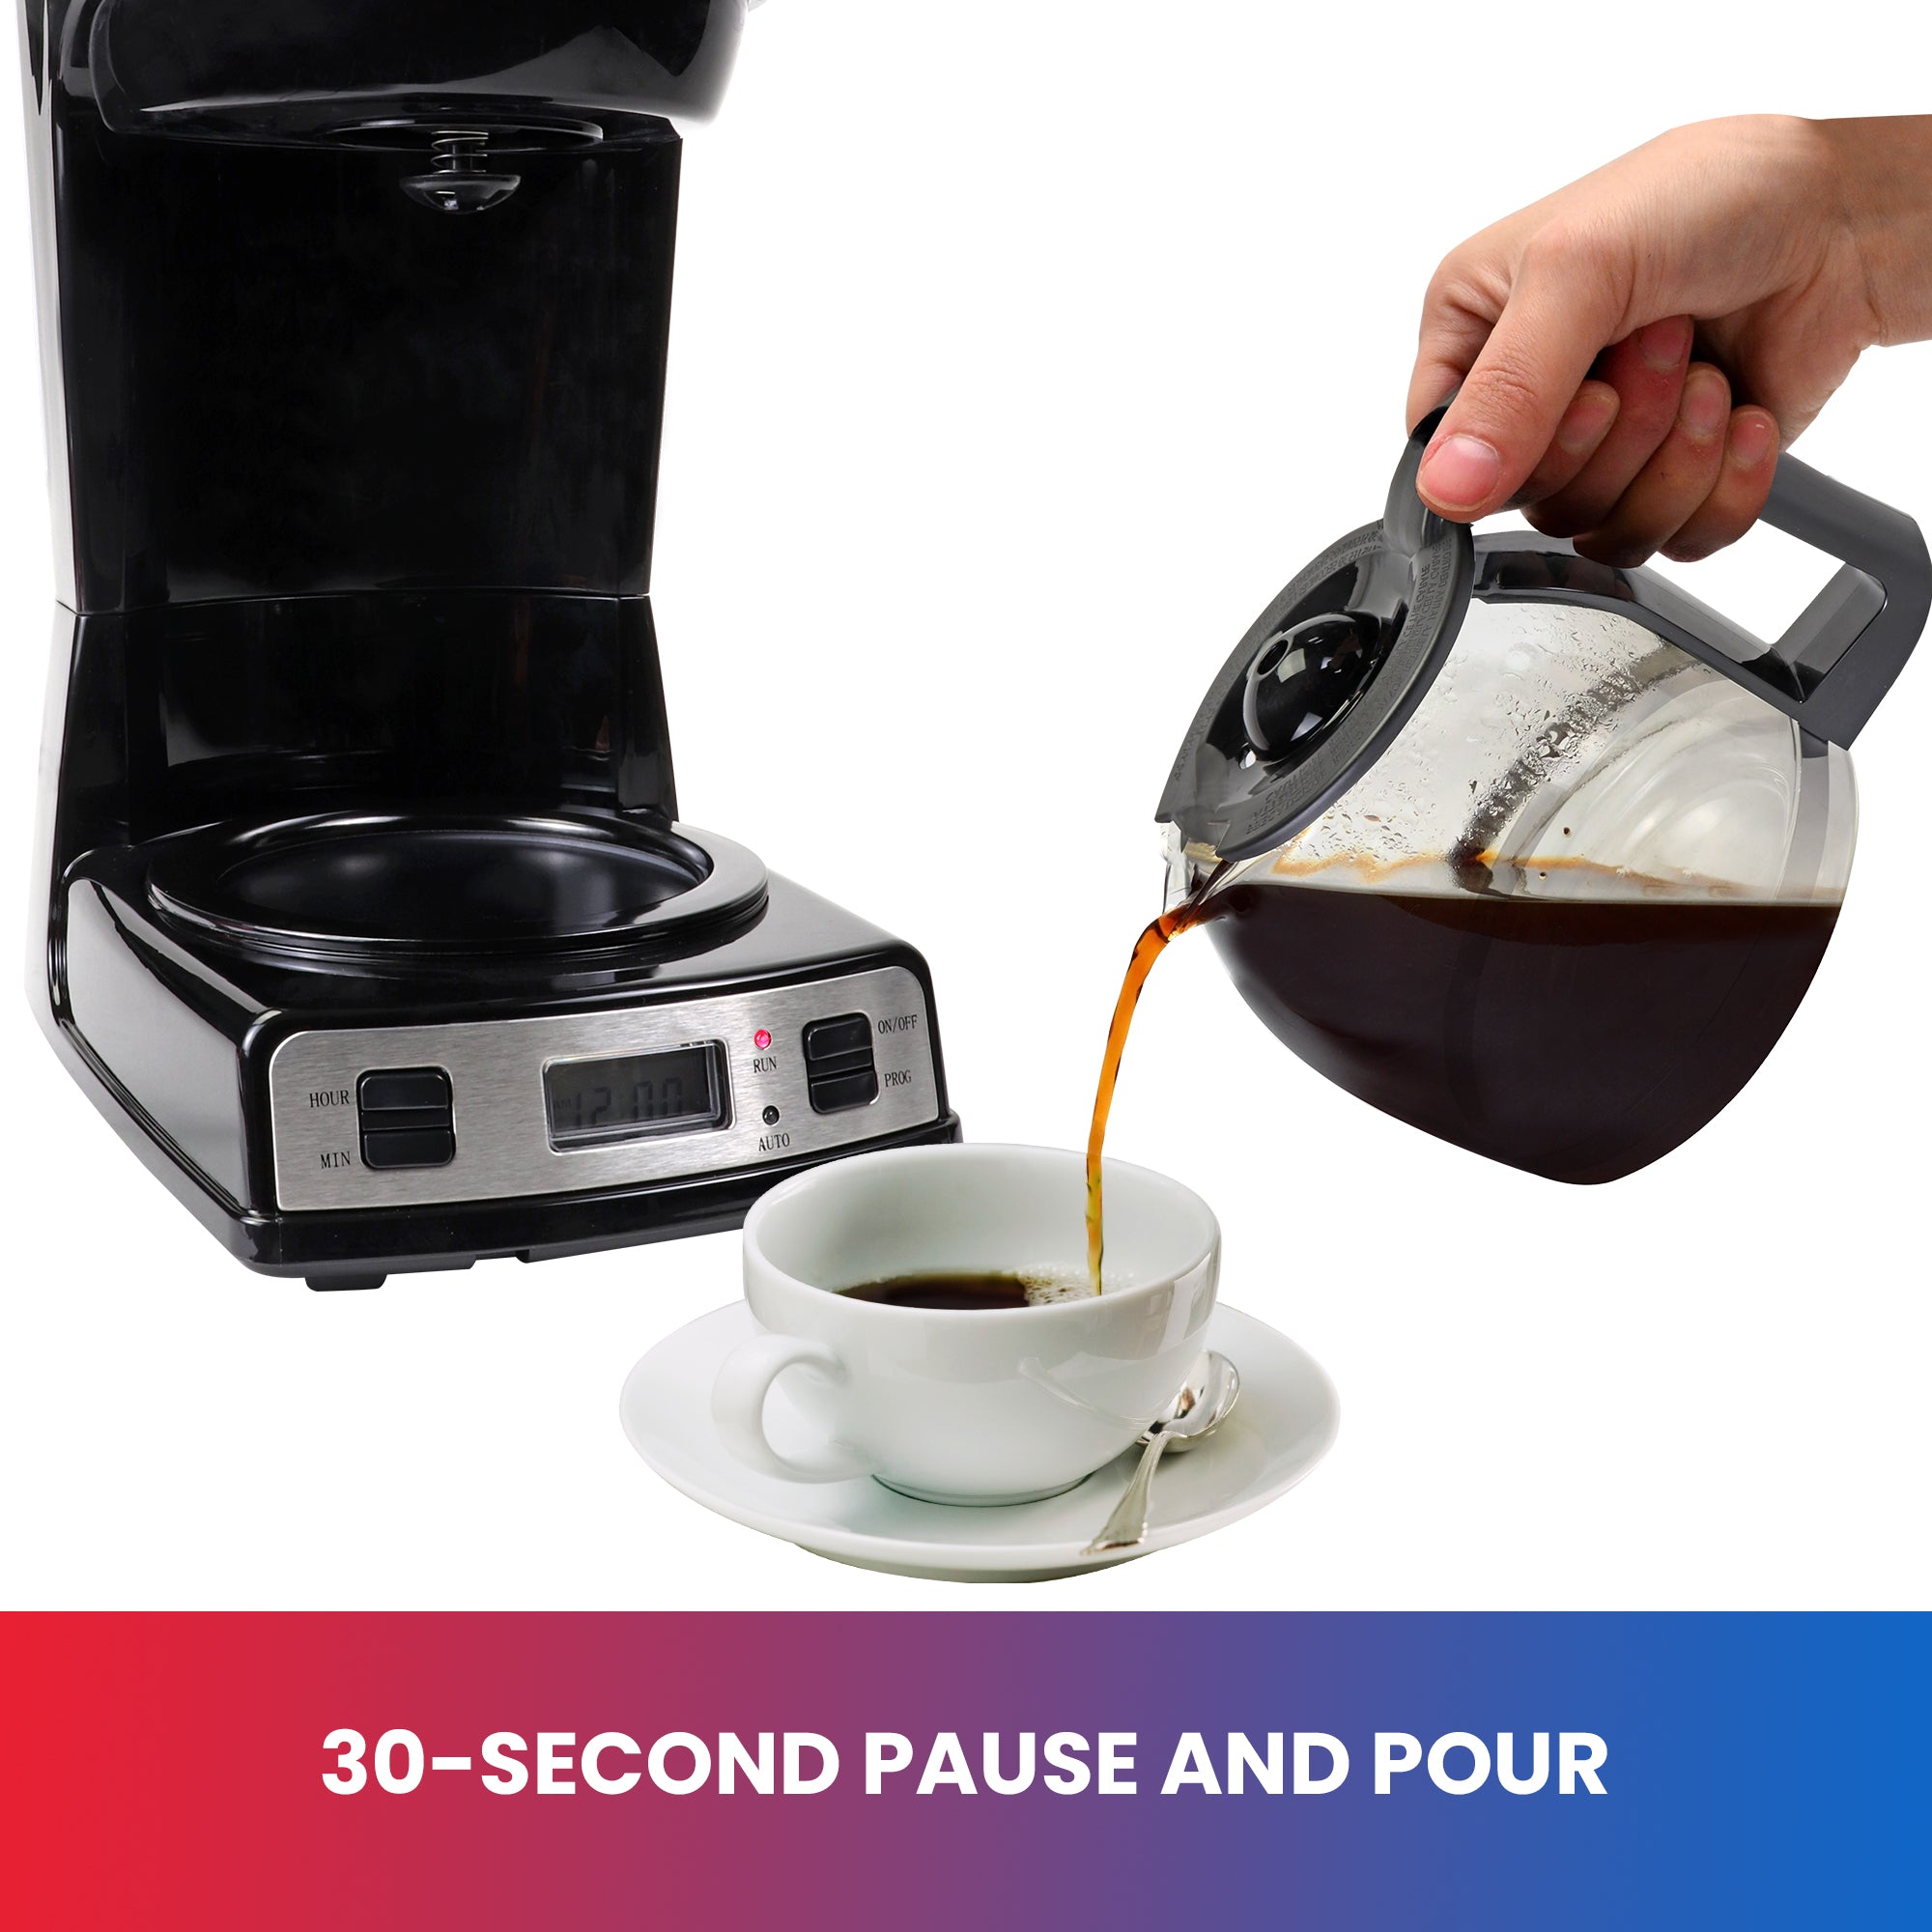 Product shot of drip coffeemaker with a person's hand pouring coffee from the glass carafe into a white mug in the foreground; Text below reads, "30-second pause and pour"